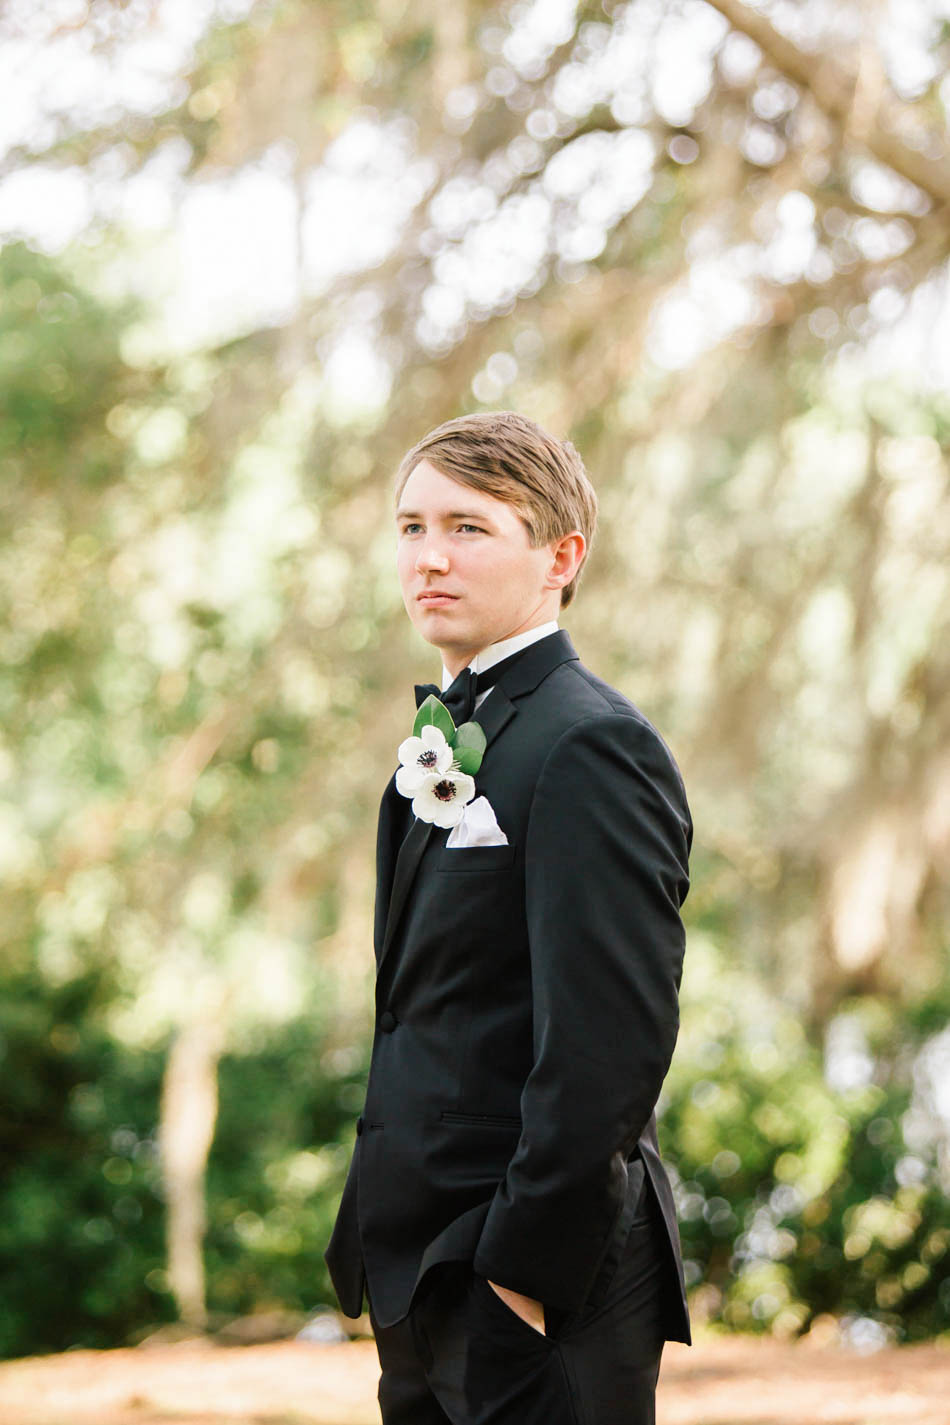 Groom stands under tree, Oakland Plantation, Mt Pleasant, South Carolina Kate Timbers Photography. http://katetimbers.com #katetimbersphotography // Charleston Photography // Inspiration